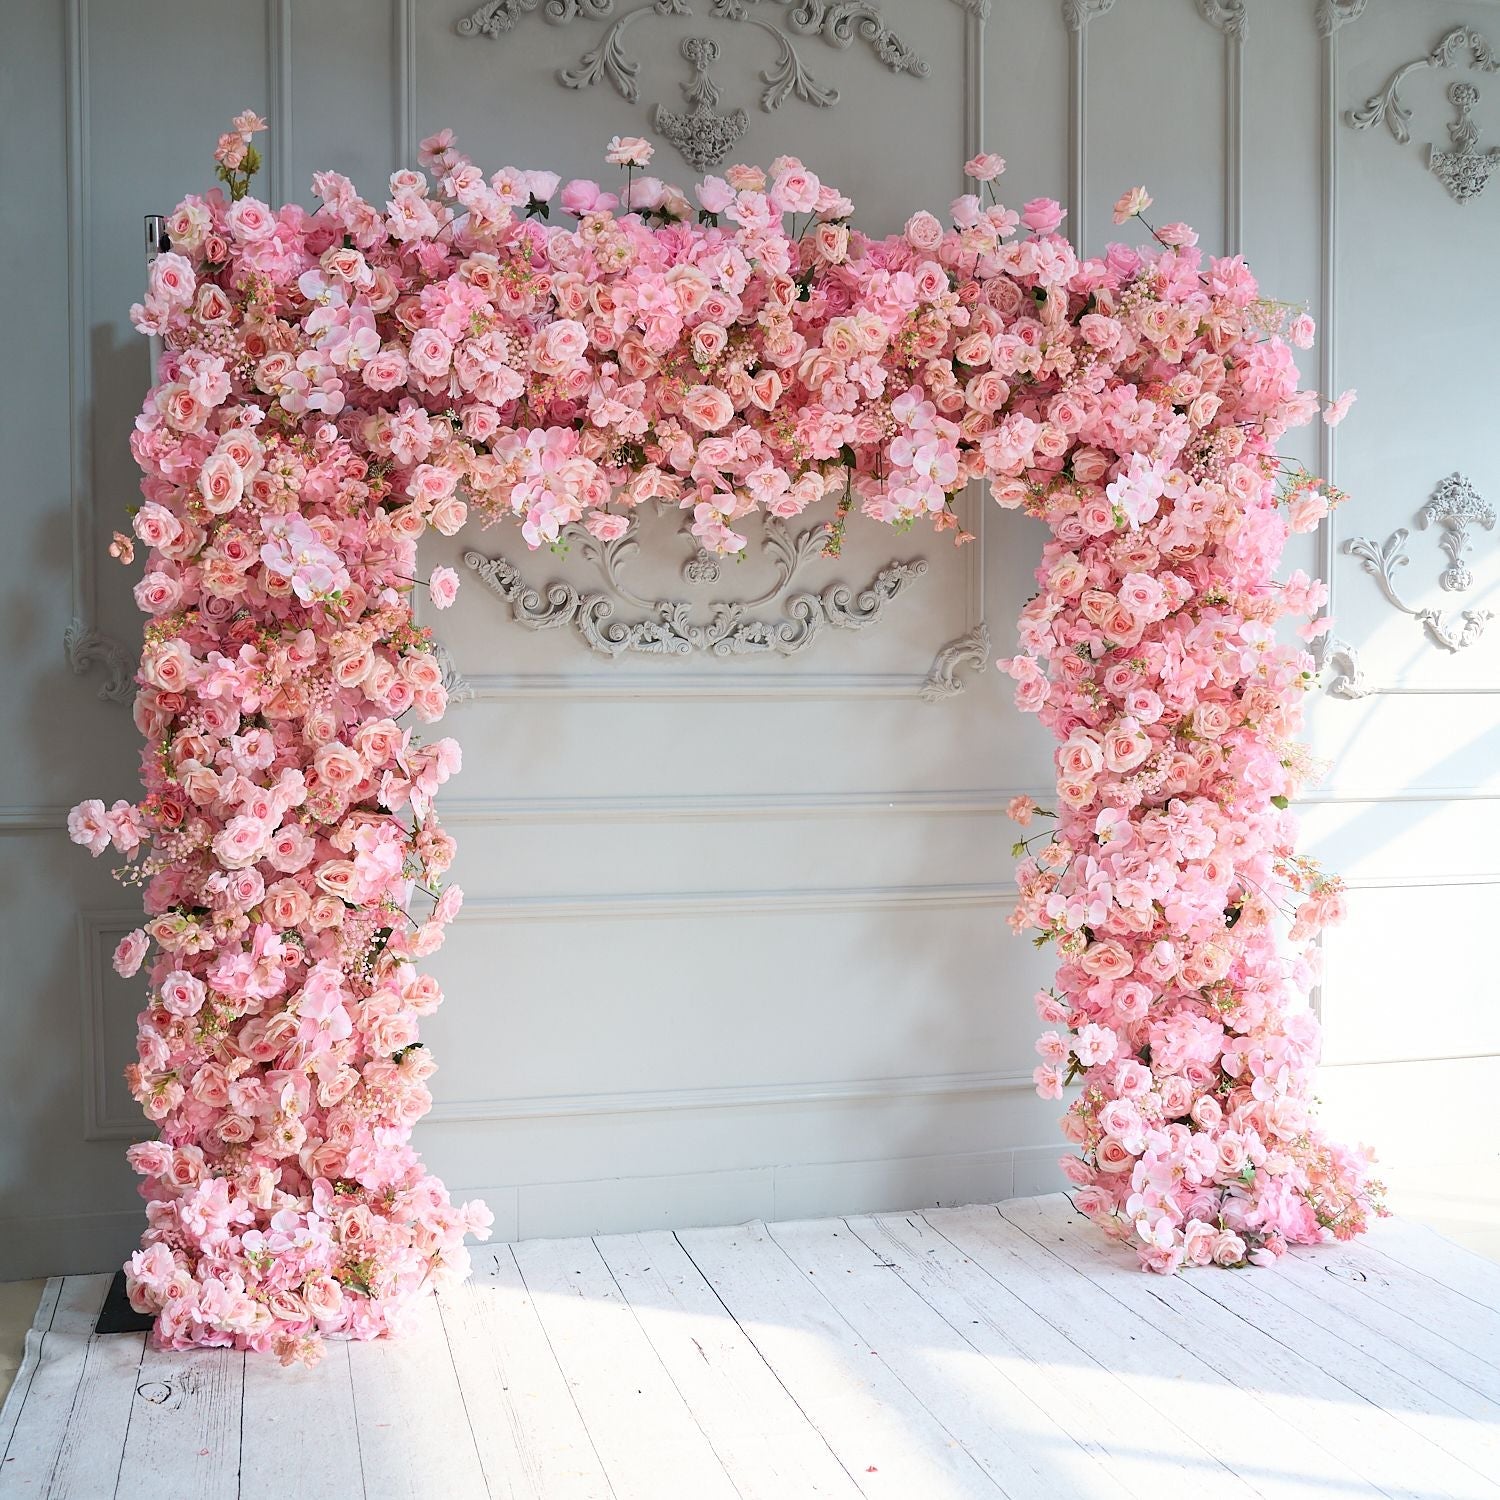 The pink roses flower wall looks cute and romantic.